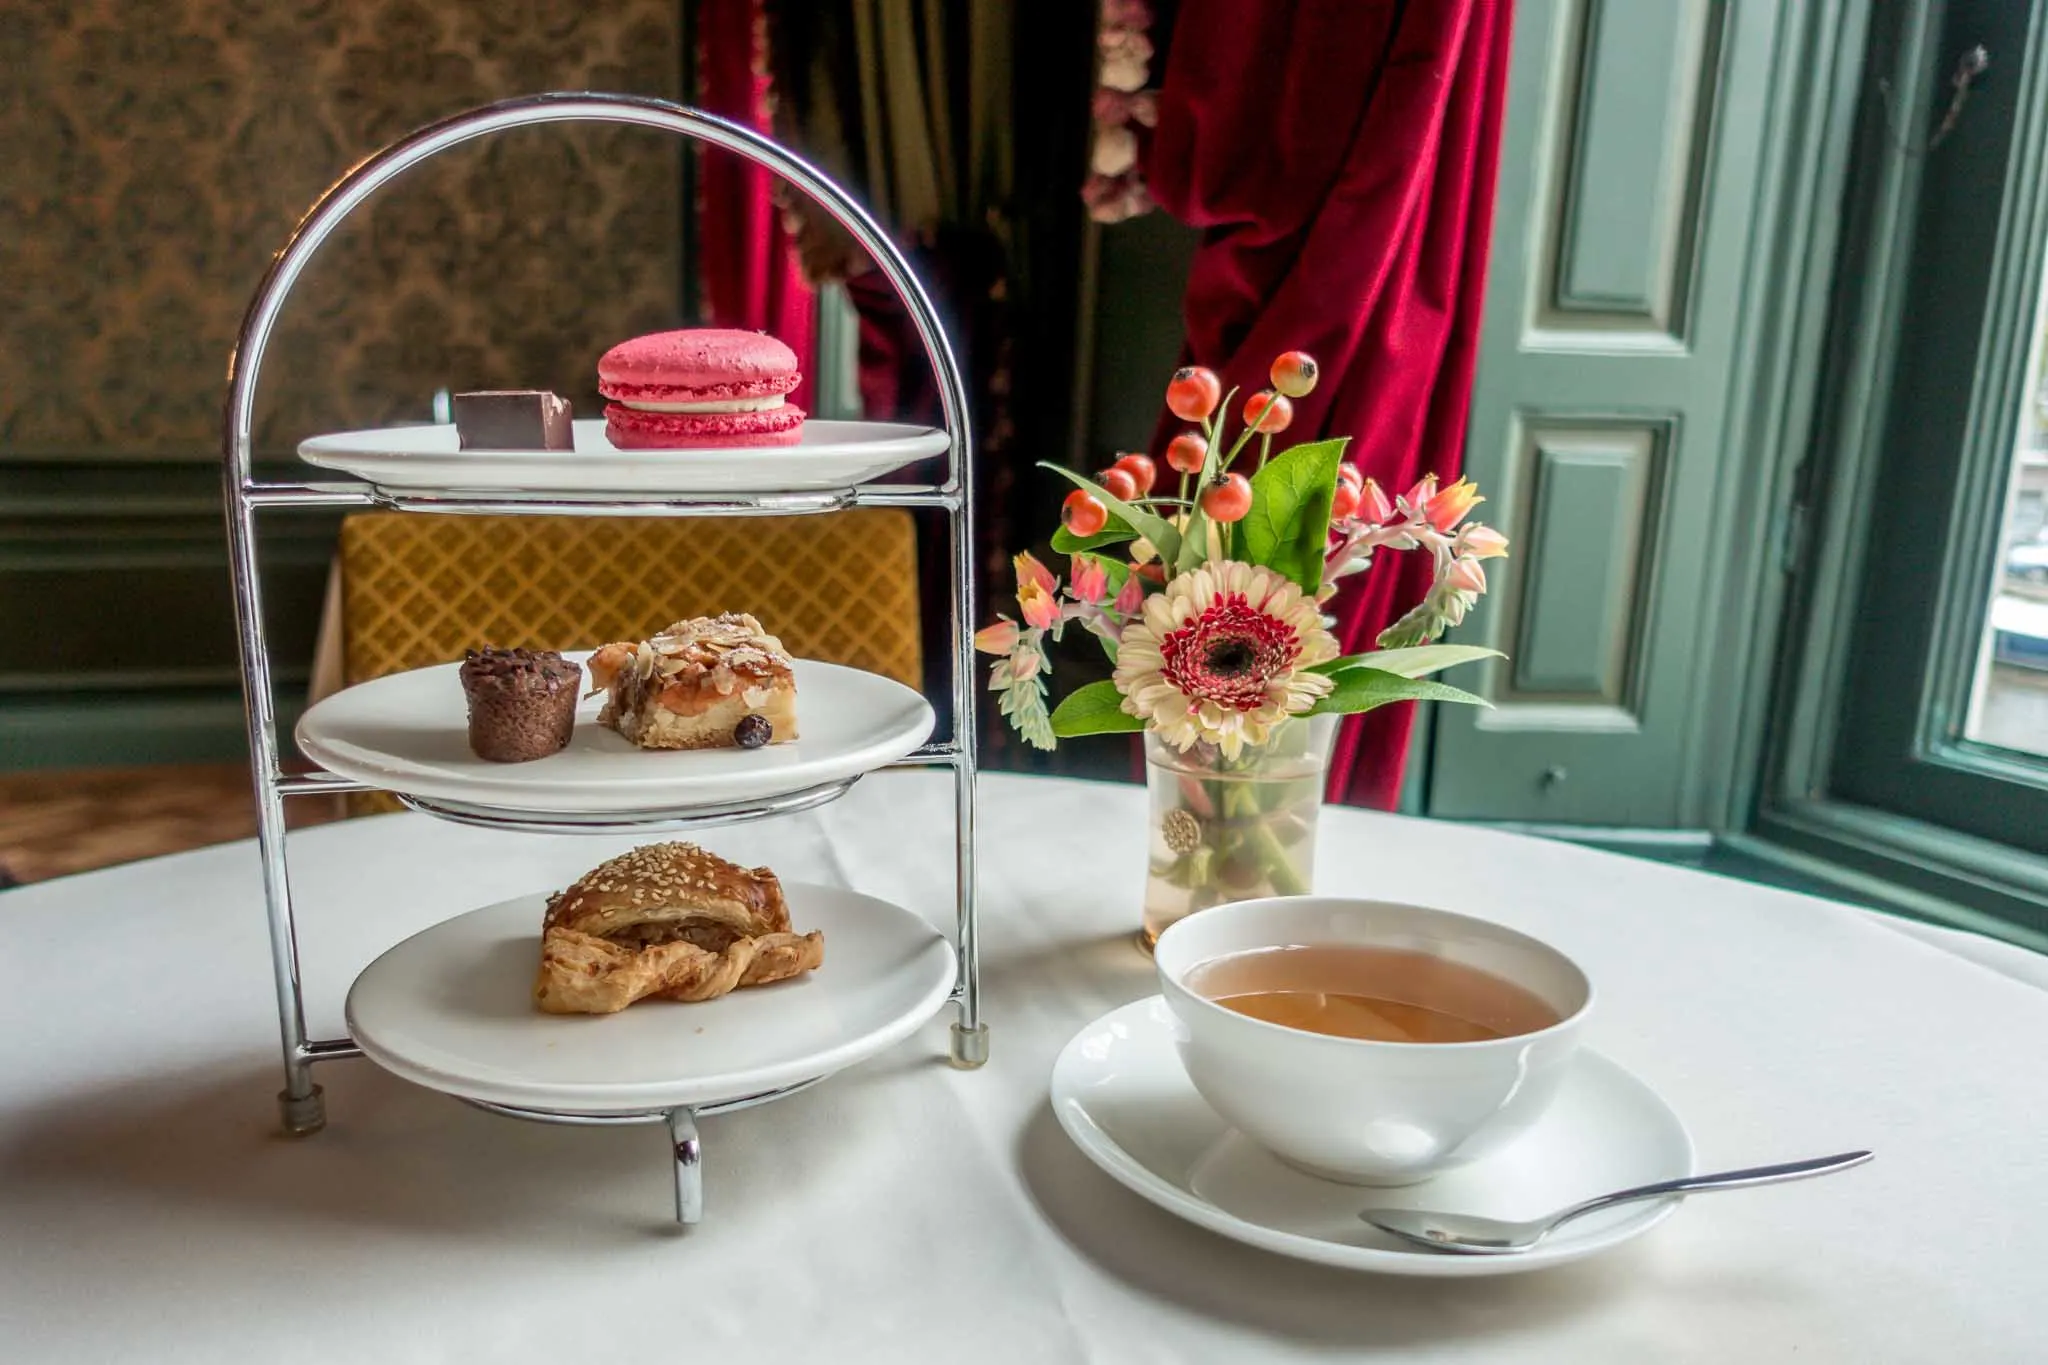 Pastries and tea for High Tea at the purse museum